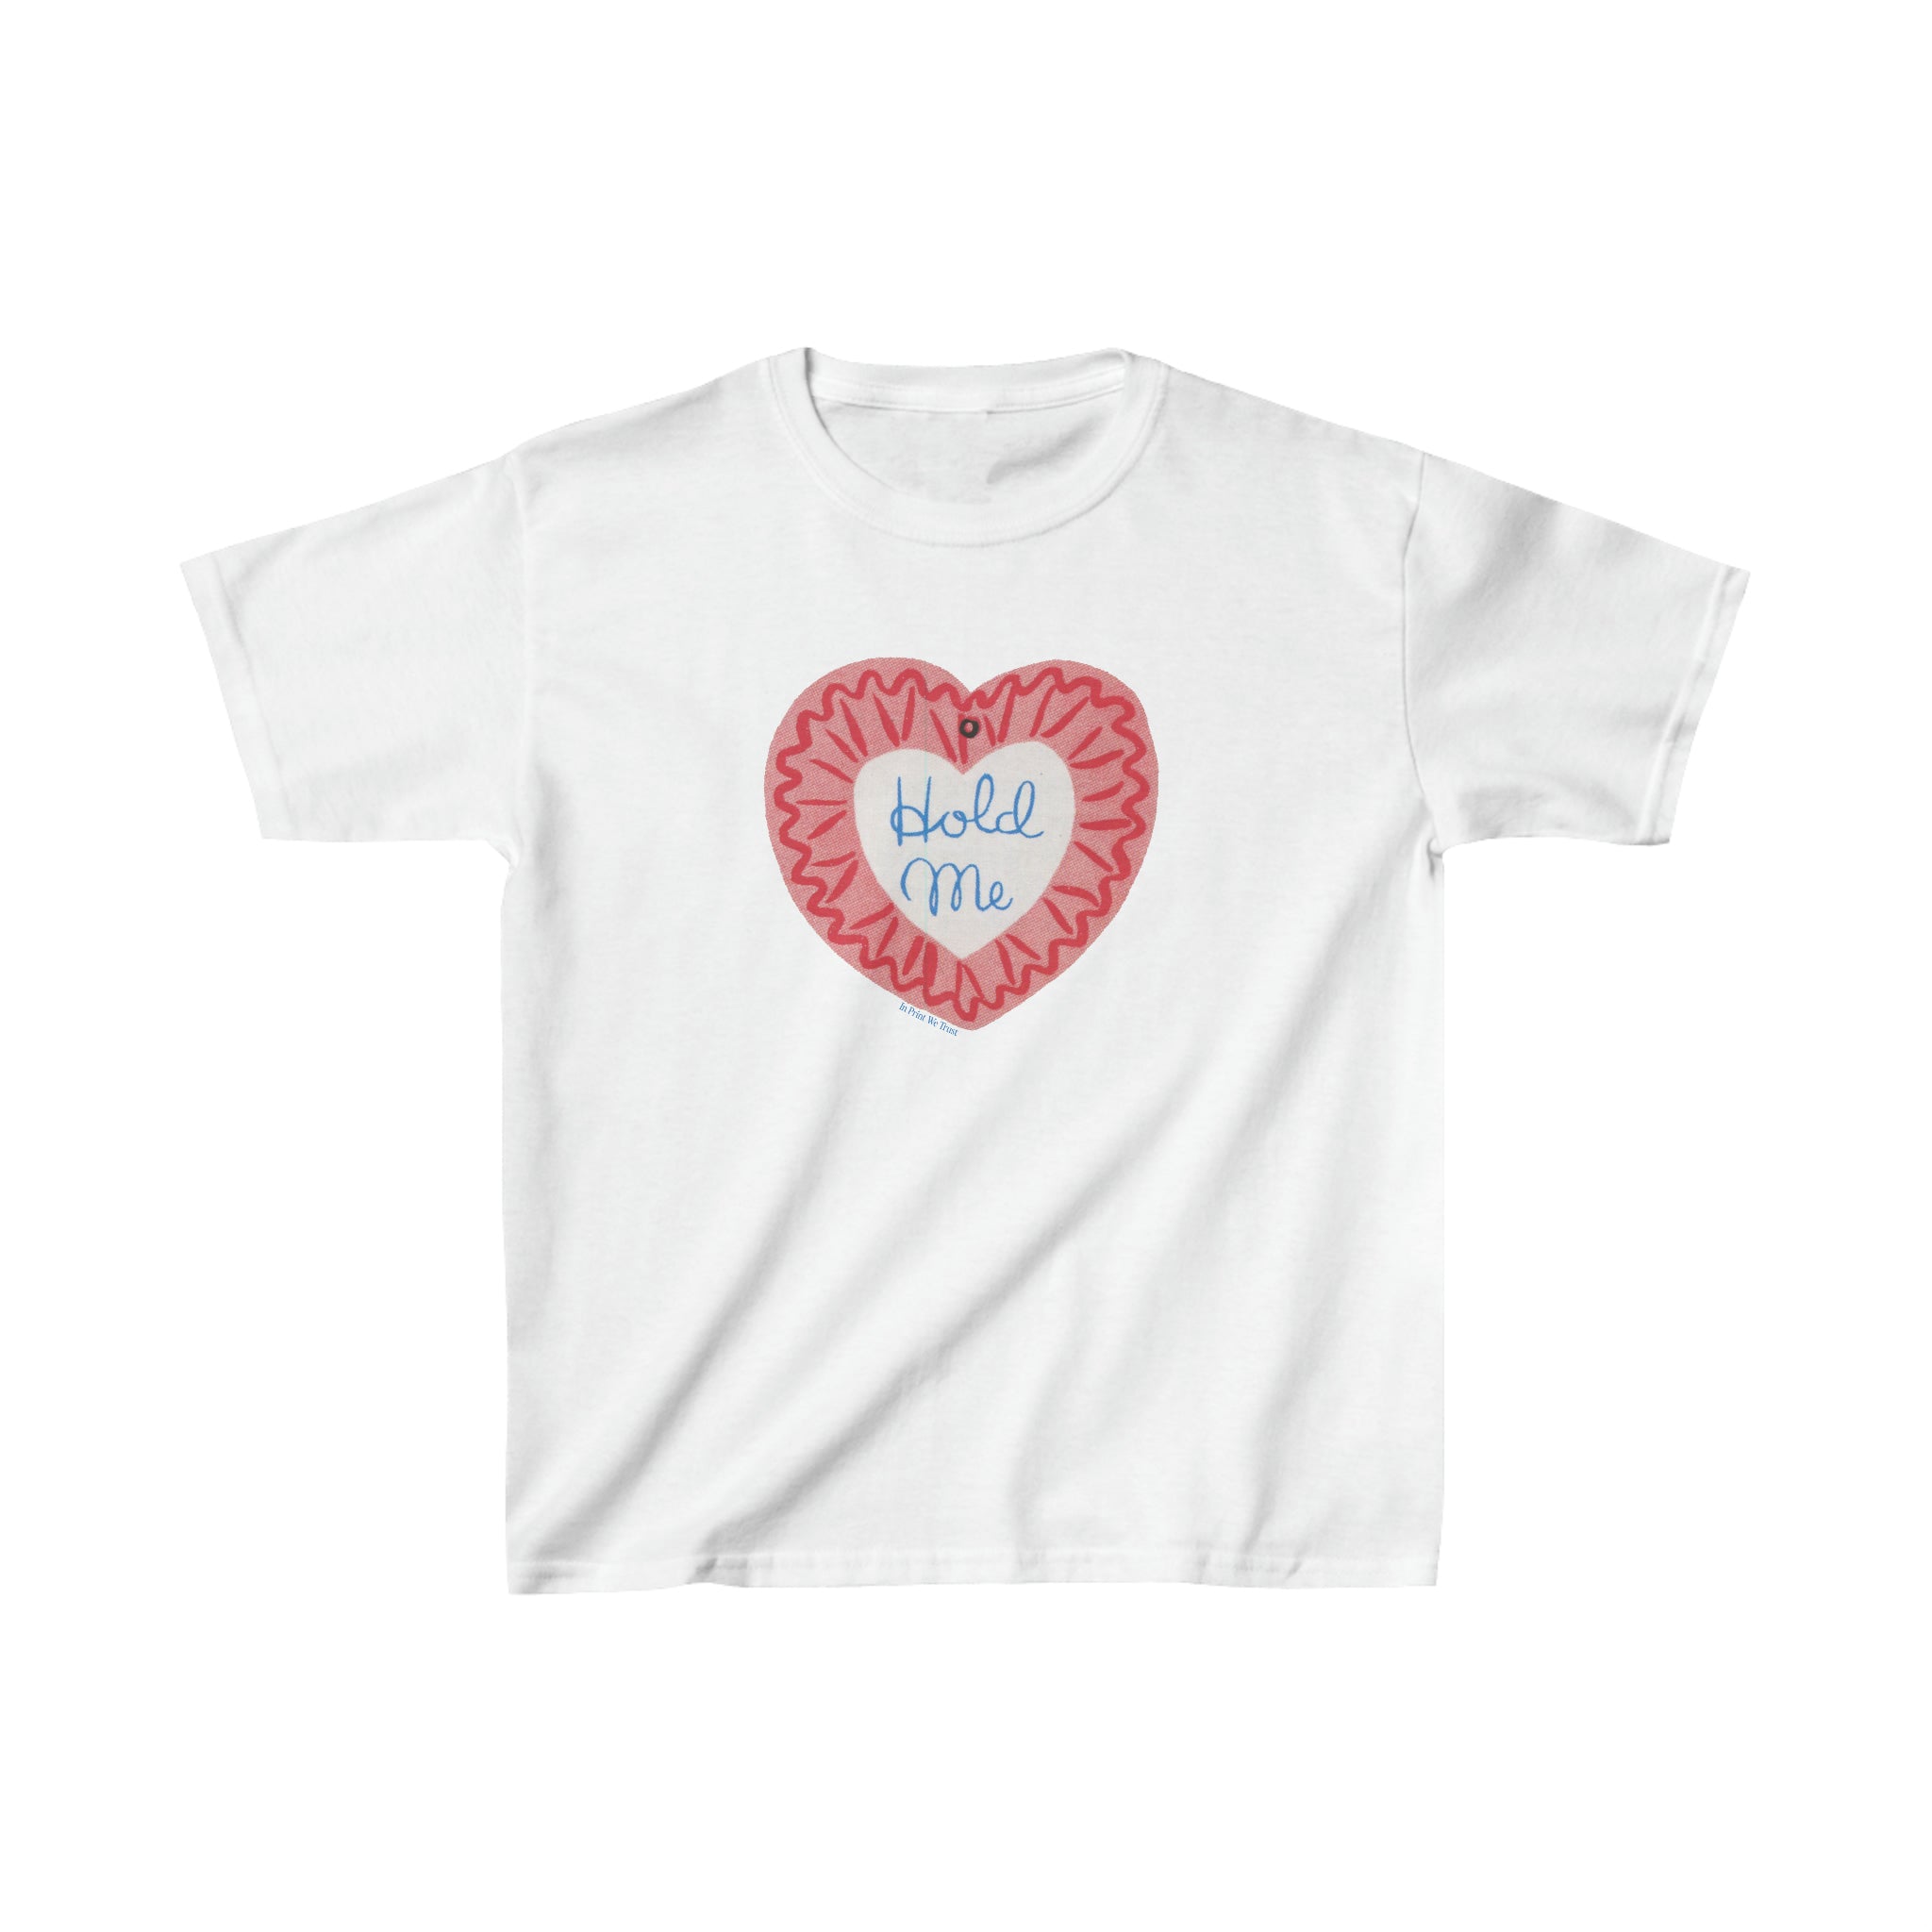 'Hold Me' baby tee - In Print We Trust